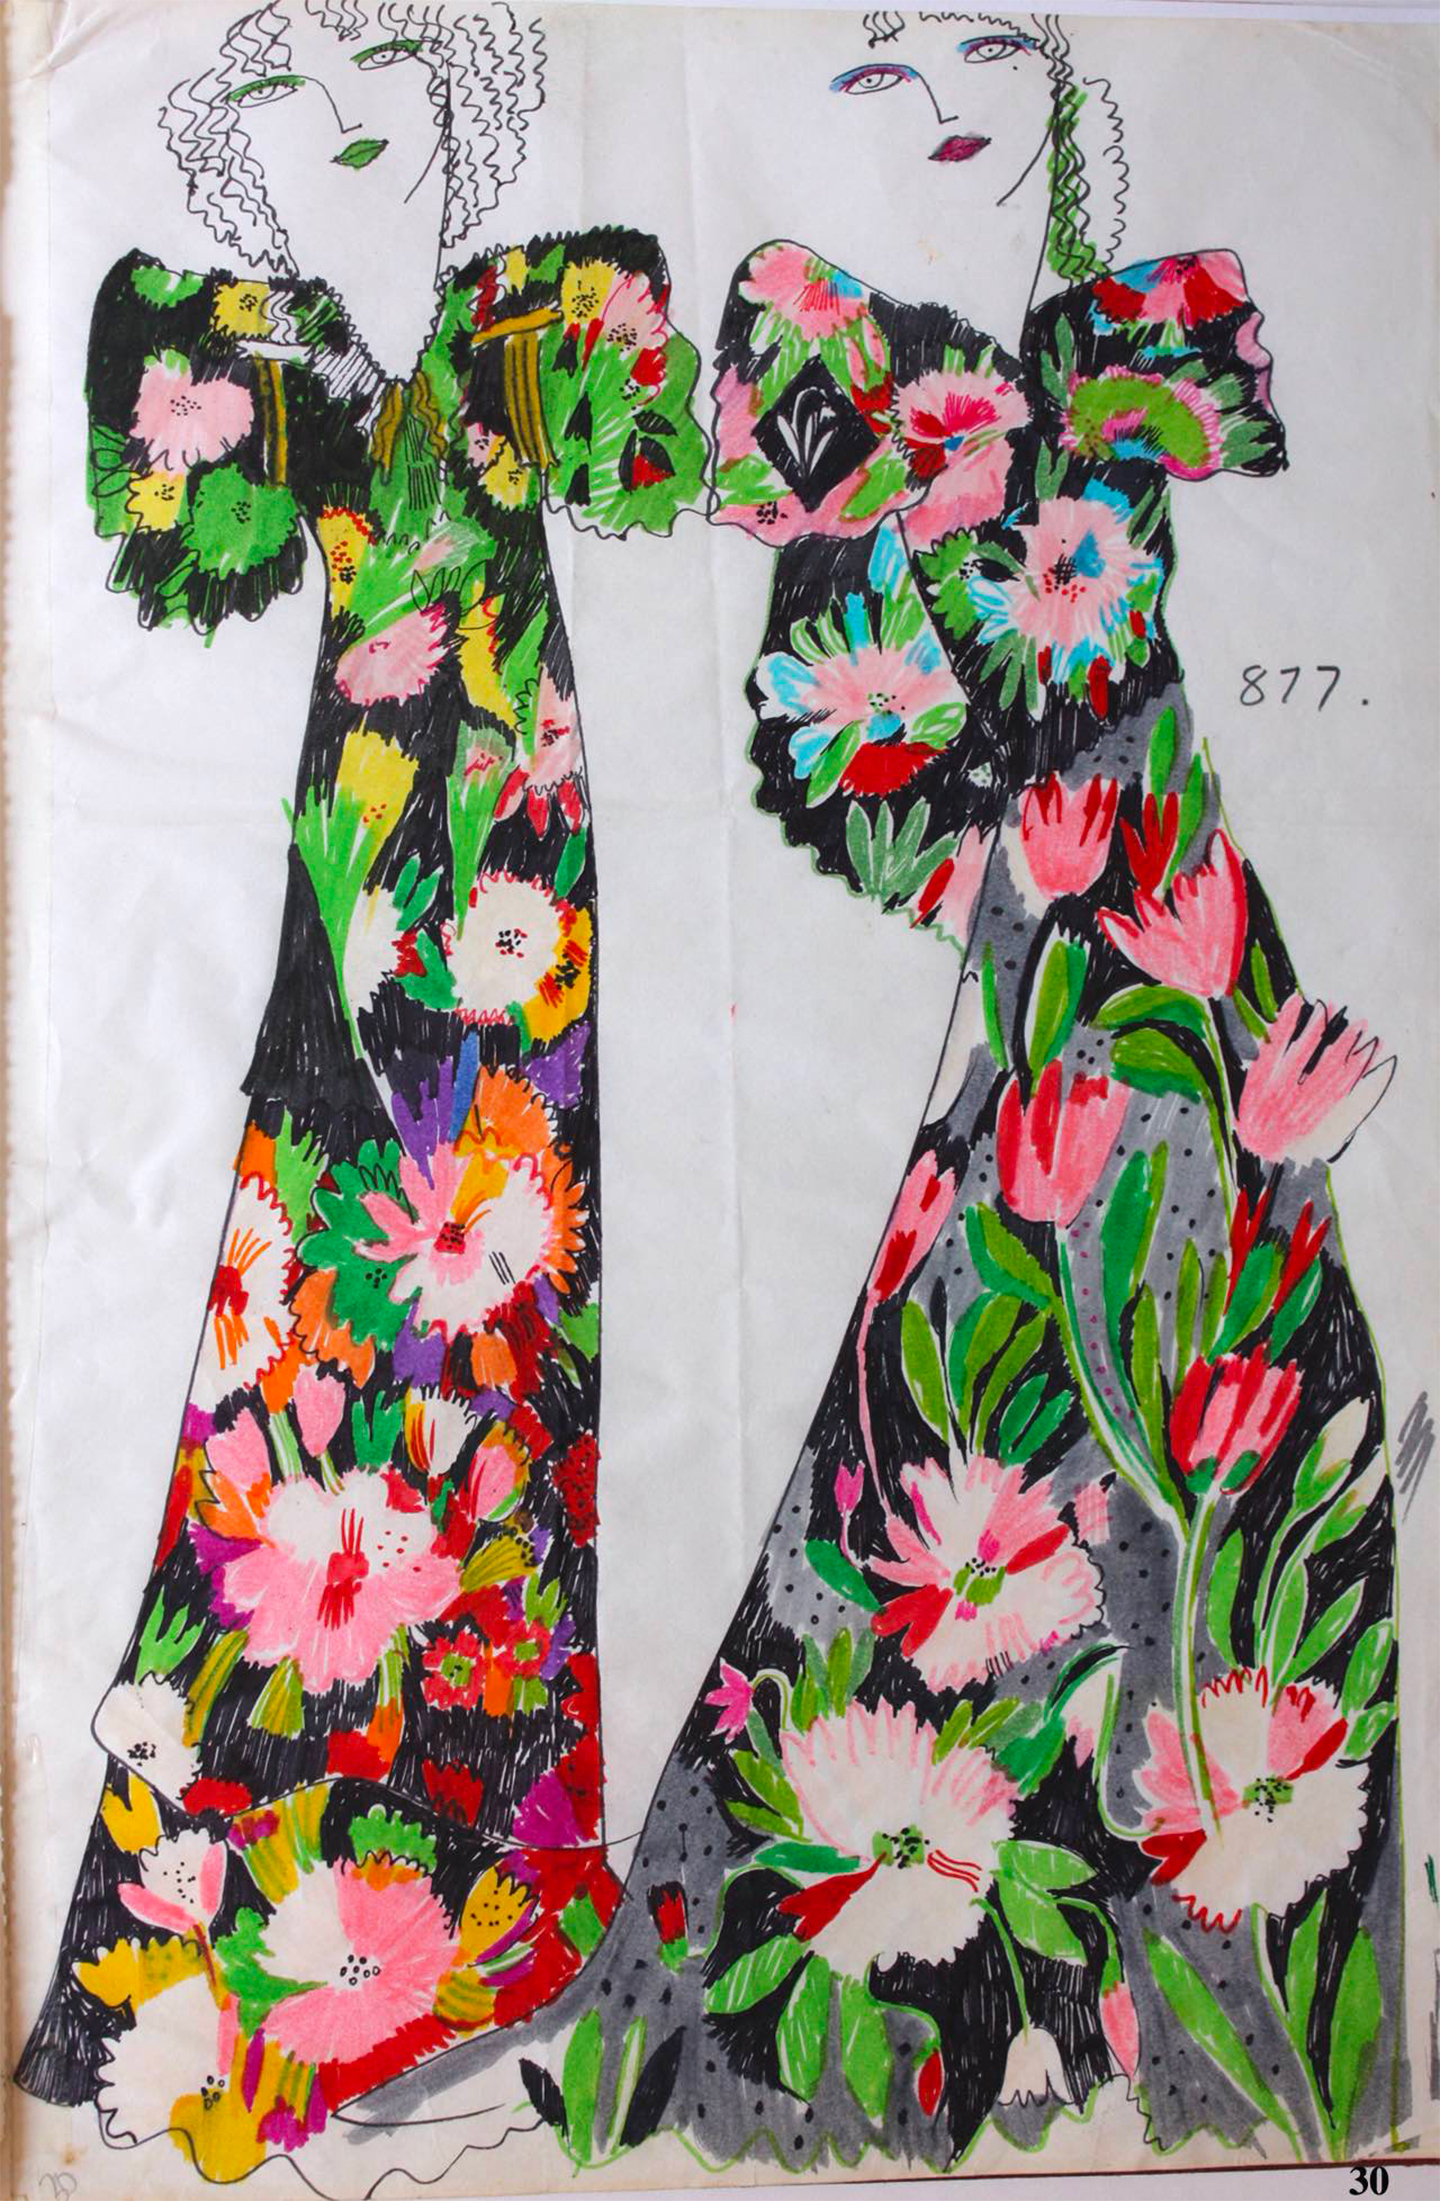 Celia Birtwell, Fashion drawing with Tulip prints, 1972. Pen and ink on paper, Collection Celia Birtwell